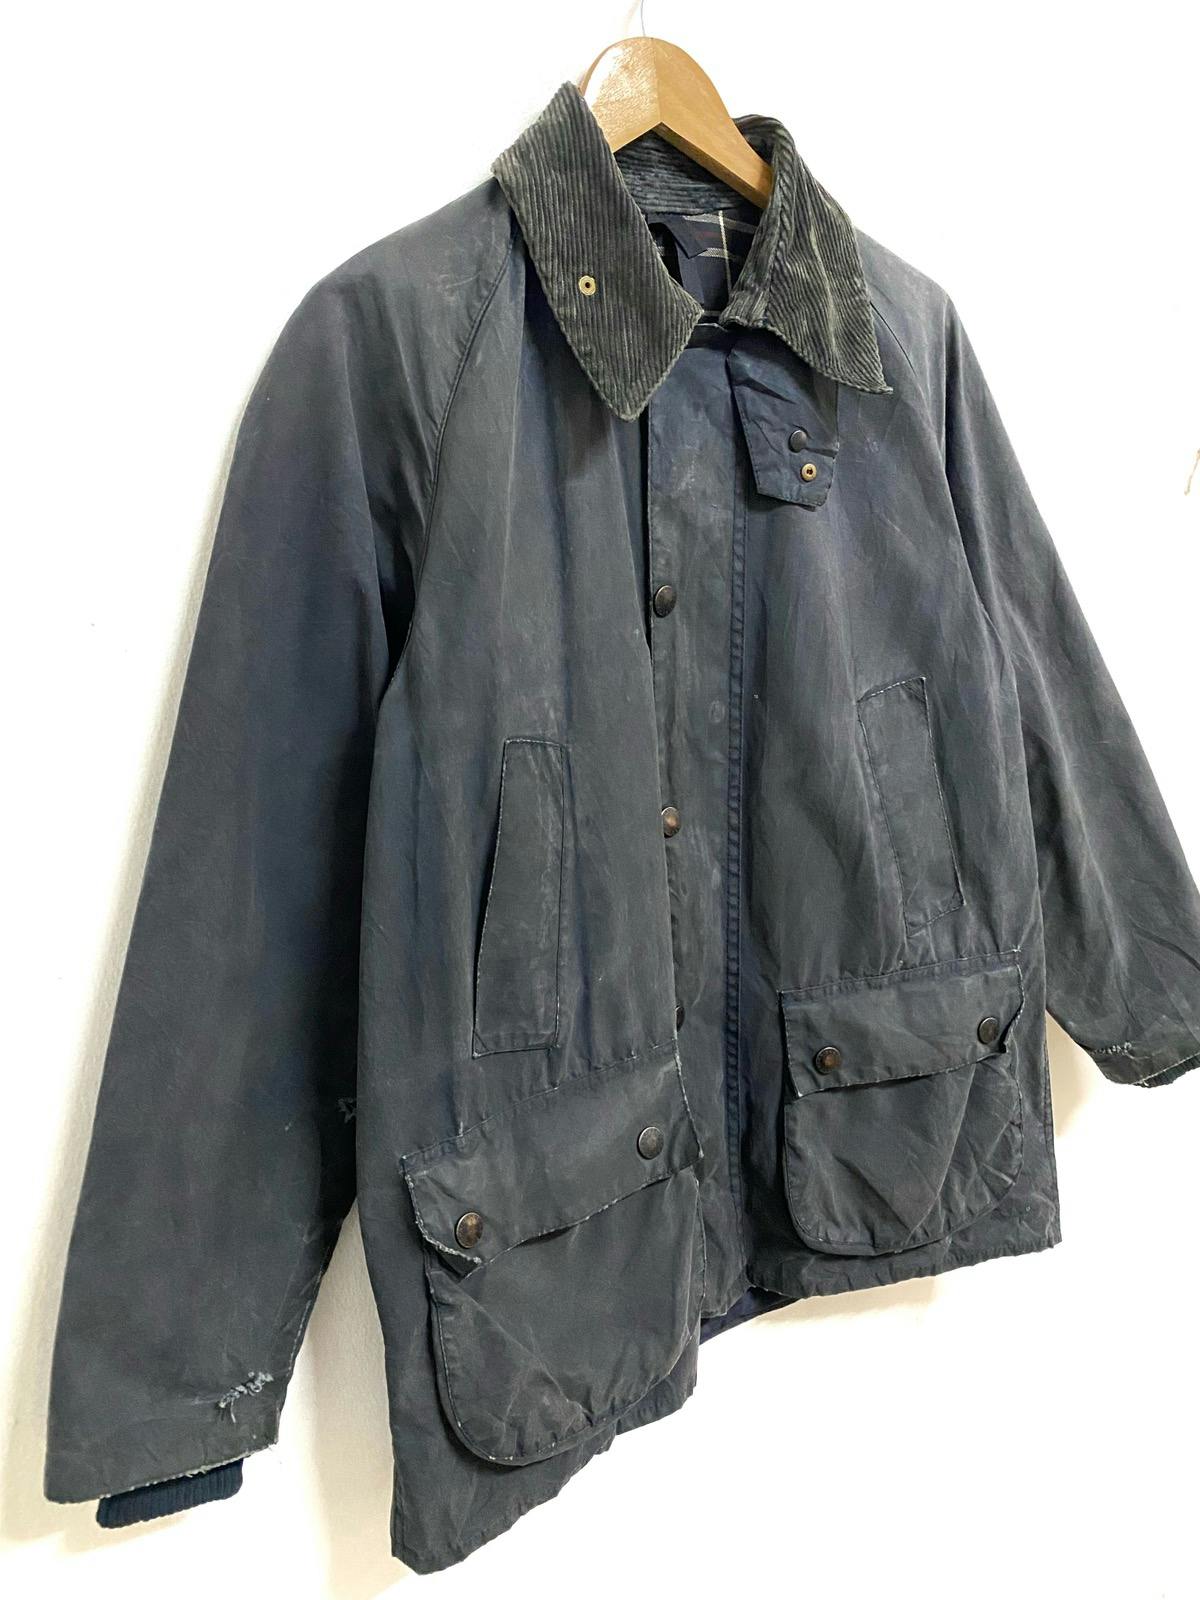 Barbour Bedale A105 Wax Jacket Made in England - 5